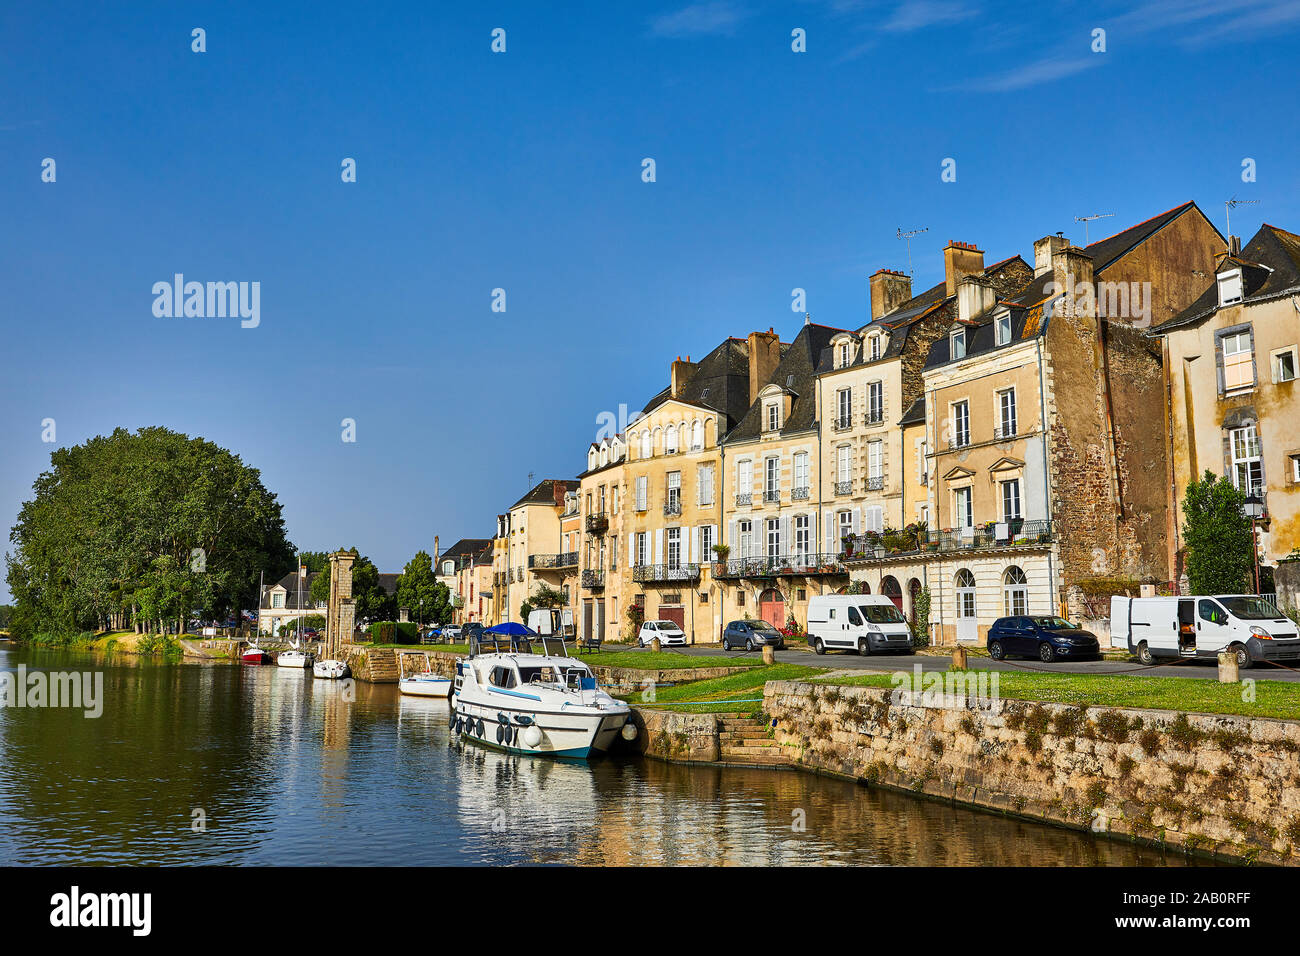 Image of Redon, Brittany, France, from the river Vilaine Stock Photo